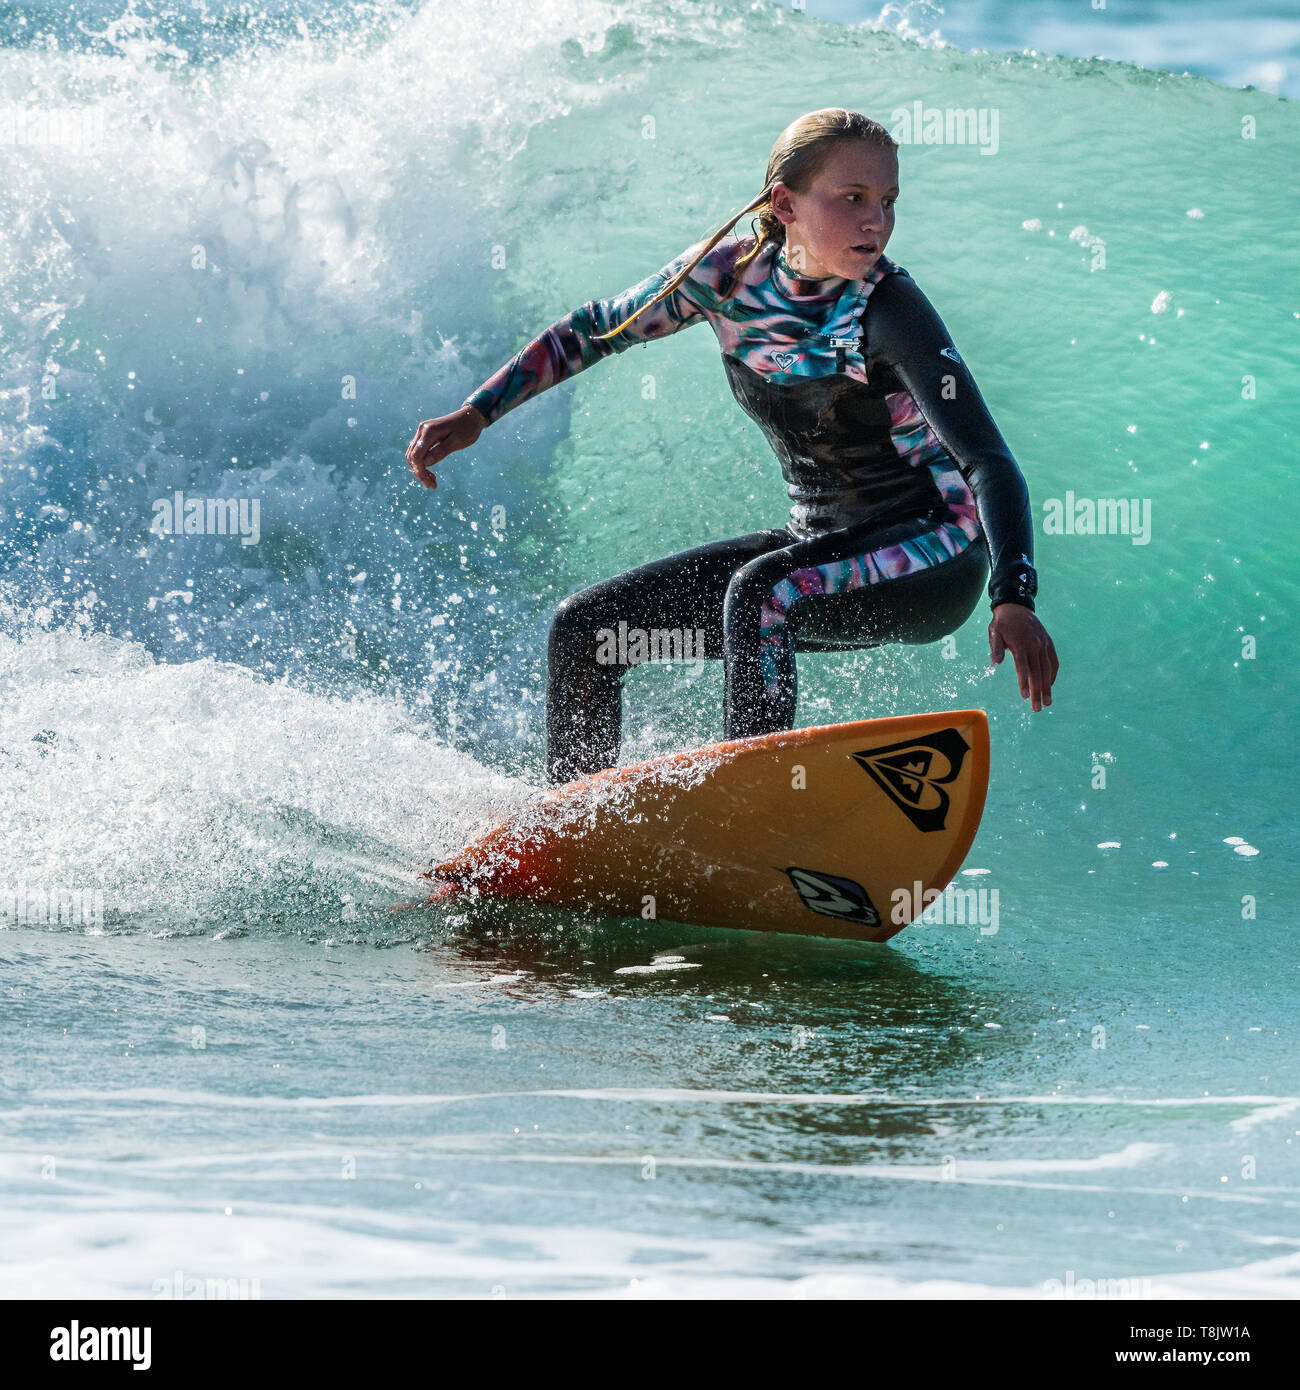 Surfing action as a young teenage female surfer rides a wave at Fistral in Newquay in Cornwall. Stock Photo